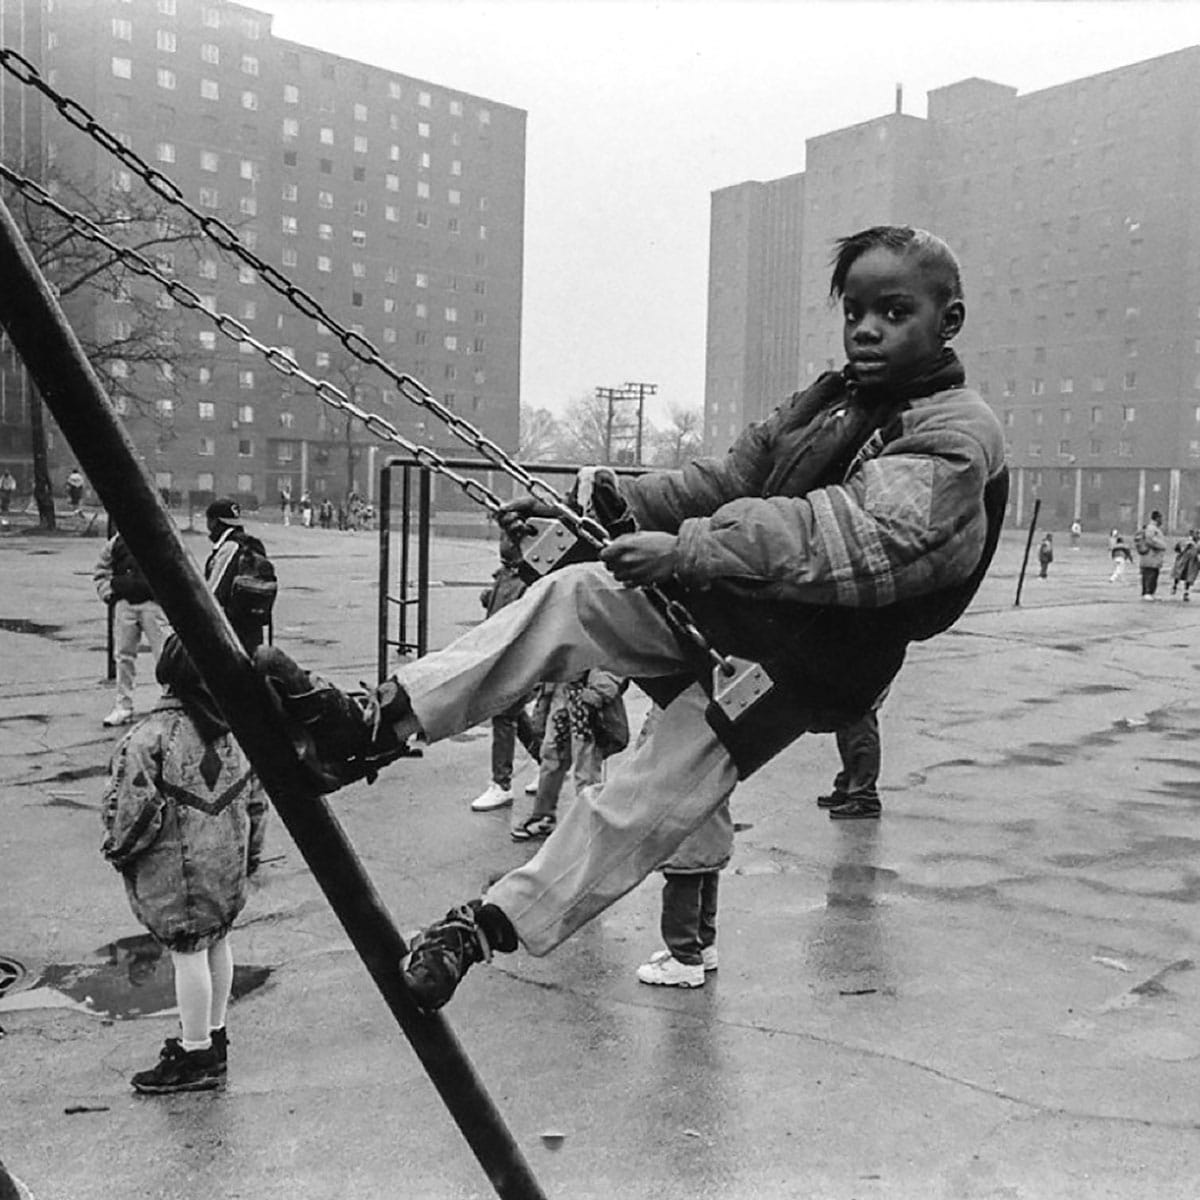 Child on swing in foreground with other people in background